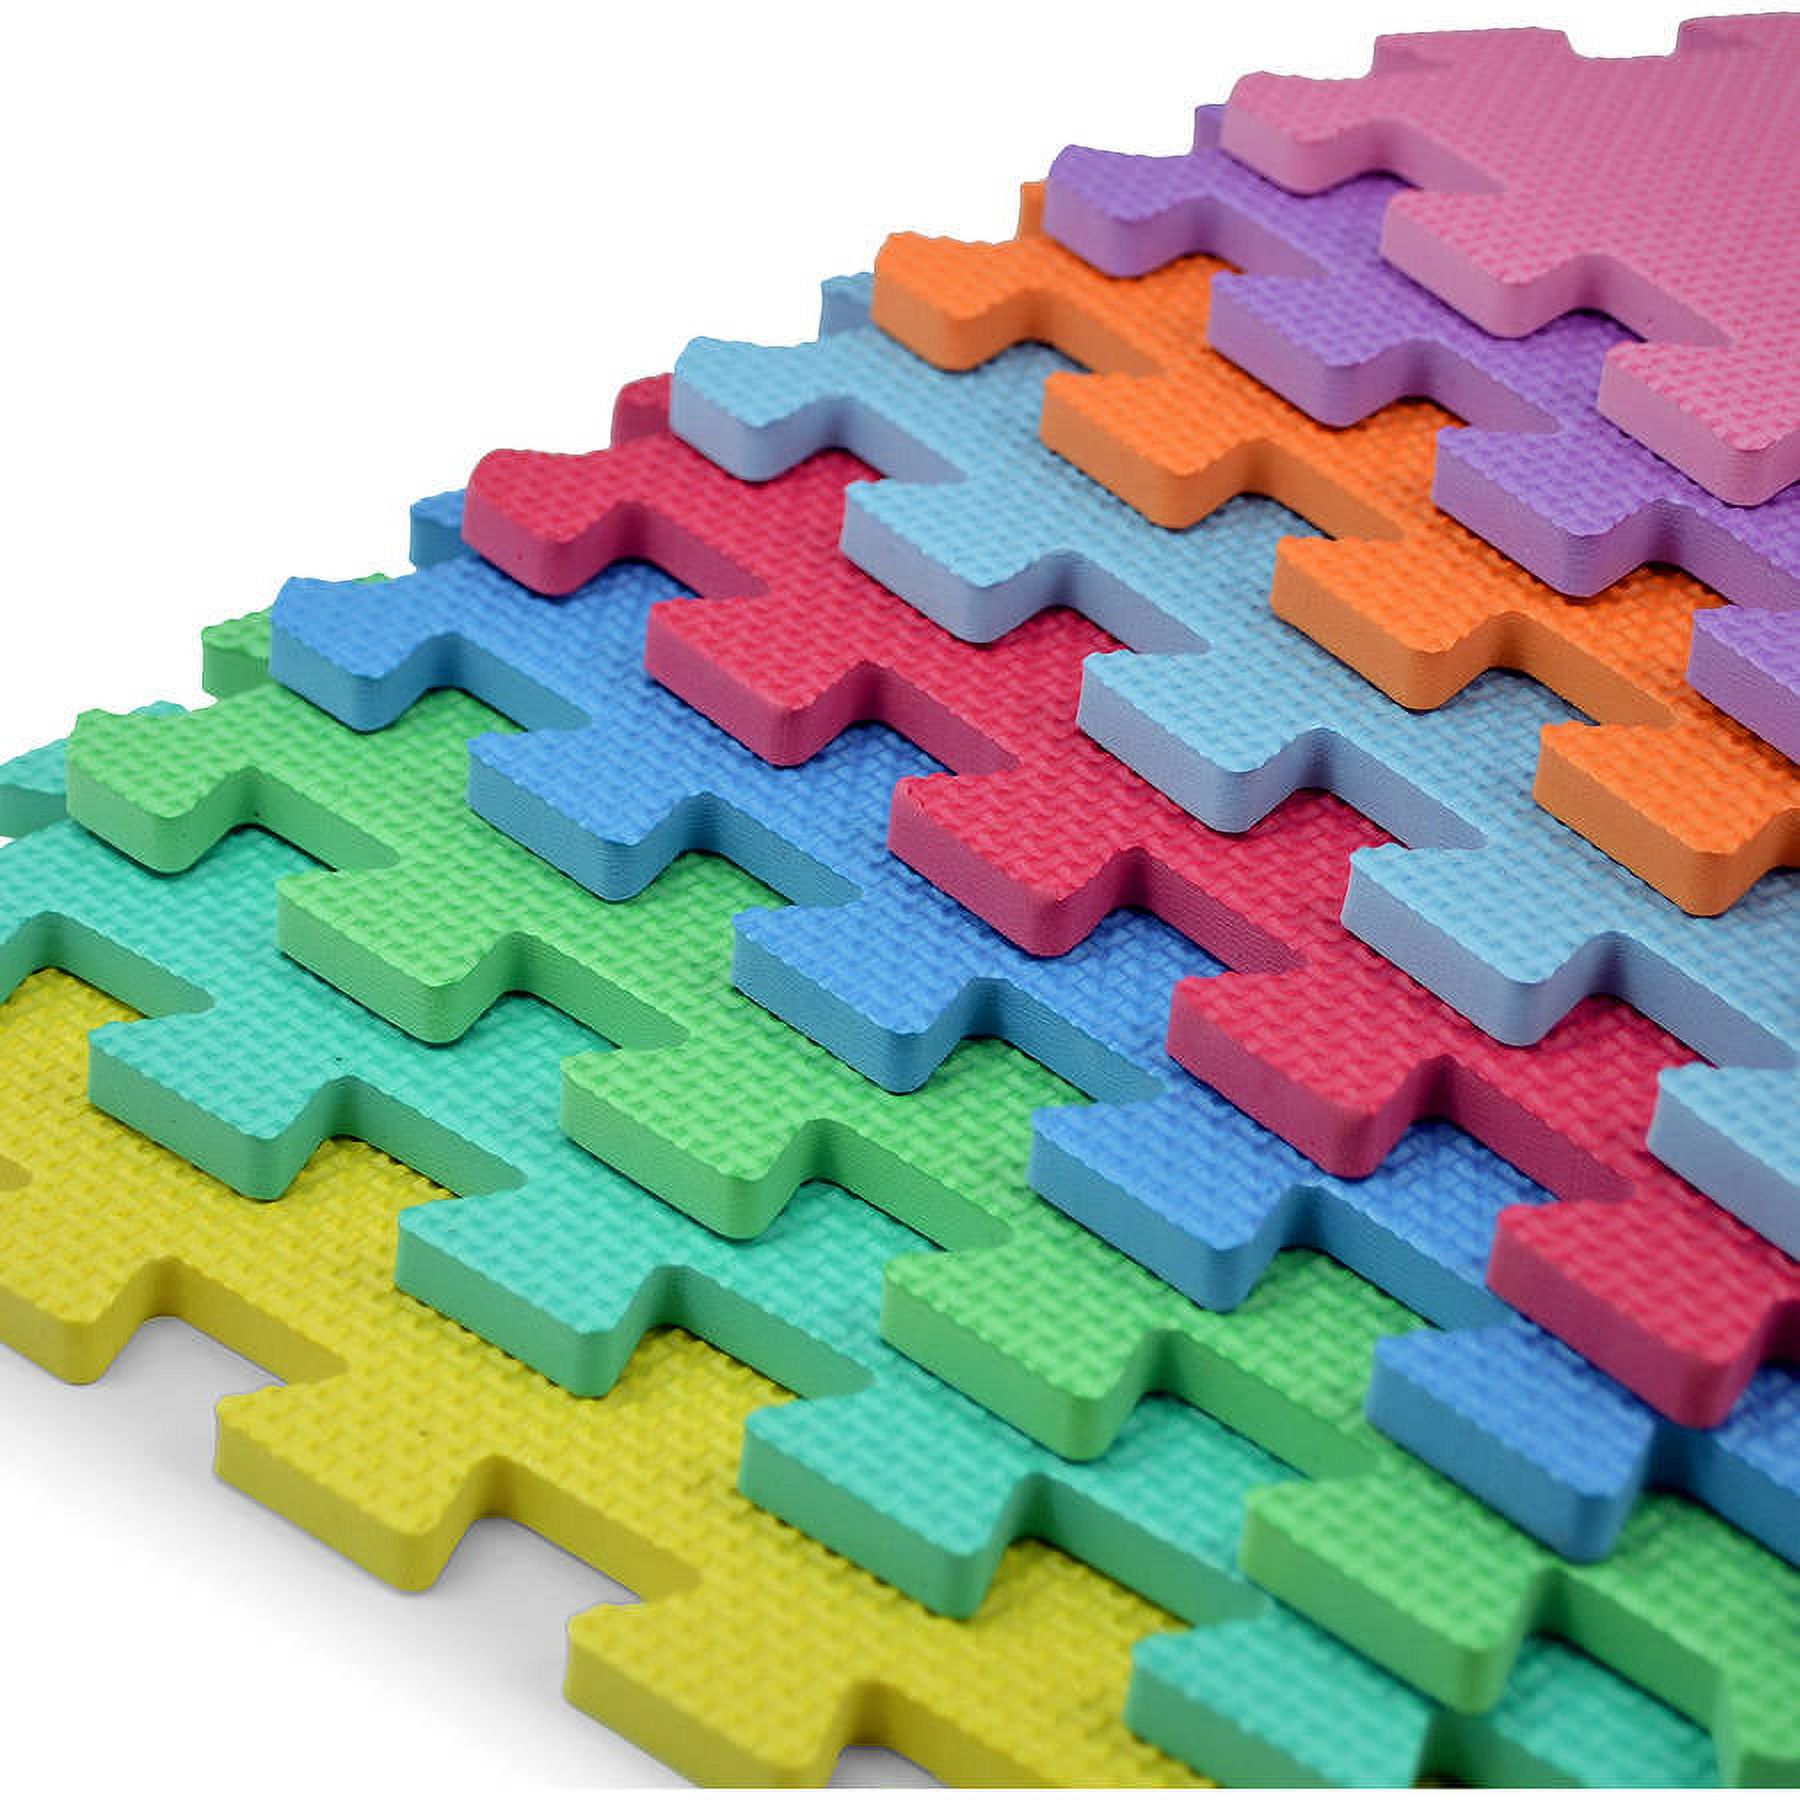 Matney Foam Floor Puzzle-Piece Play Mat, Great for Kids to Learn and Play, 9 Tile Pieces - image 3 of 6